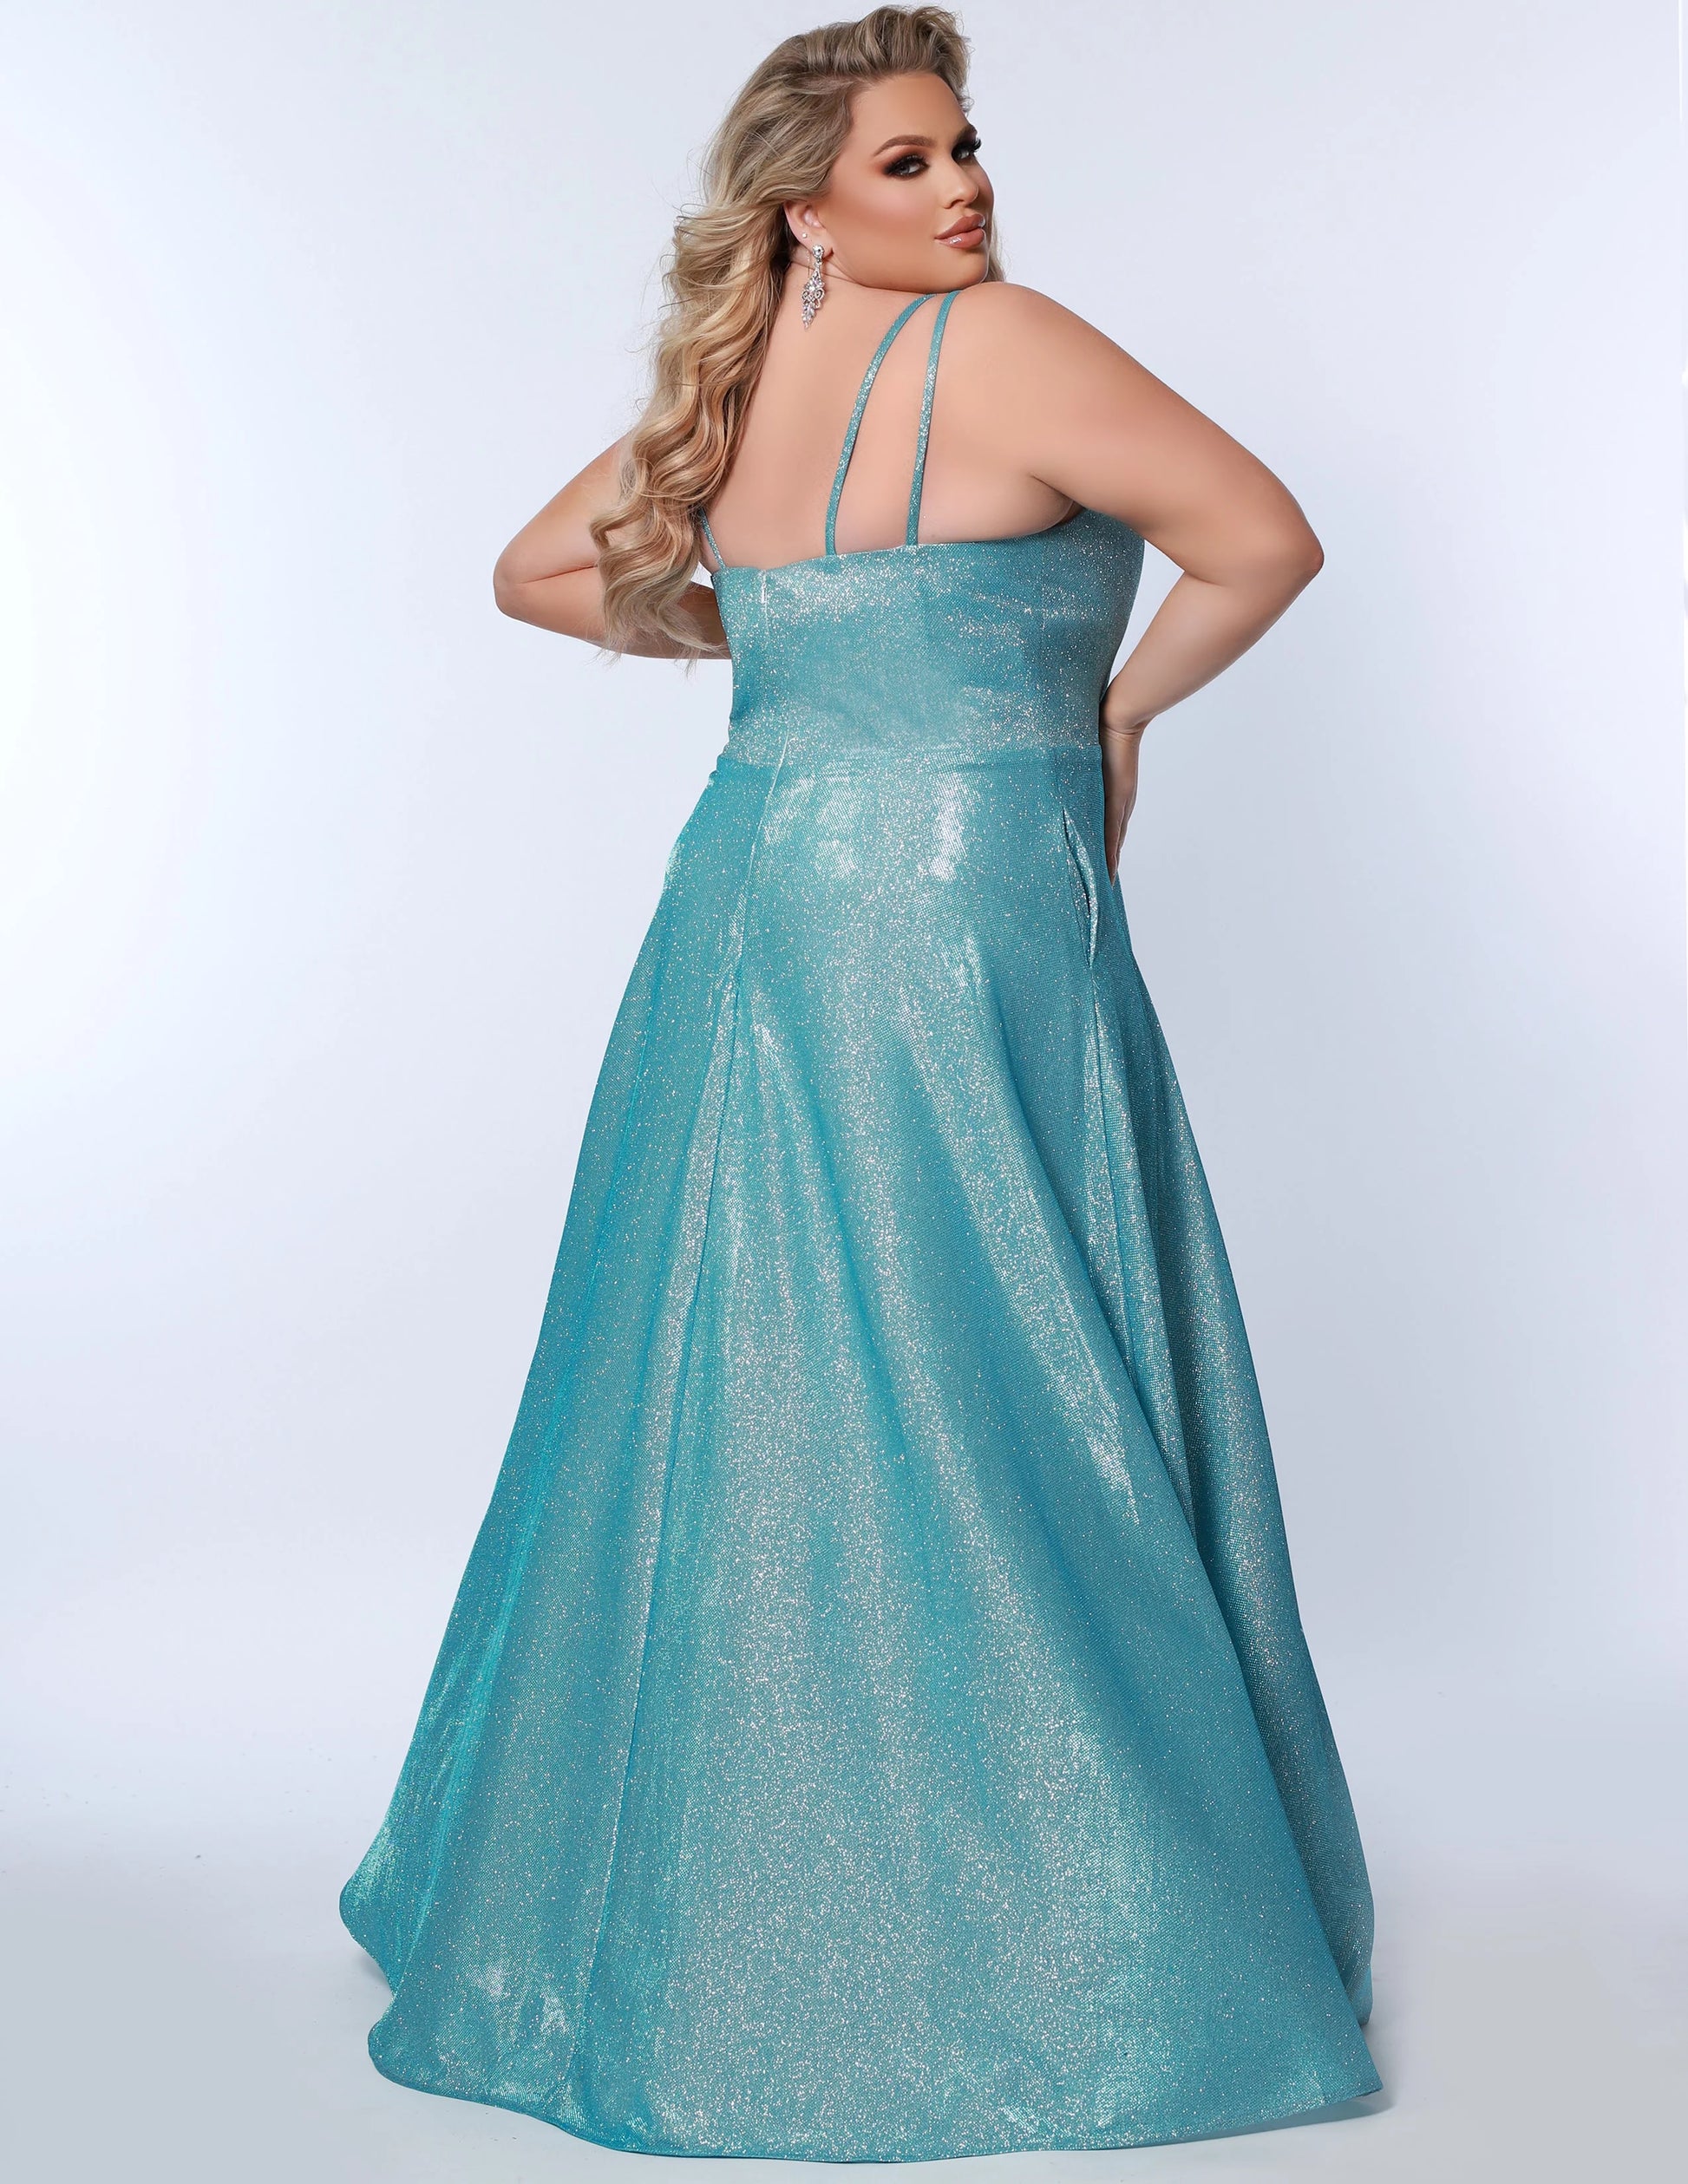 This plus-sized prom dress from Sydney's Closet SC7349 is made of shimmering knit and features an A-line silhouette, scoop neckline, double straps, zip-up back, natural waist, A-line skirt with slit, and hidden pockets. Fully lined for a comfortable and flattering fit. Perfect for special occasions. Keep it sweet and sparkly when you wear our classic A-line plus size prom dress! 